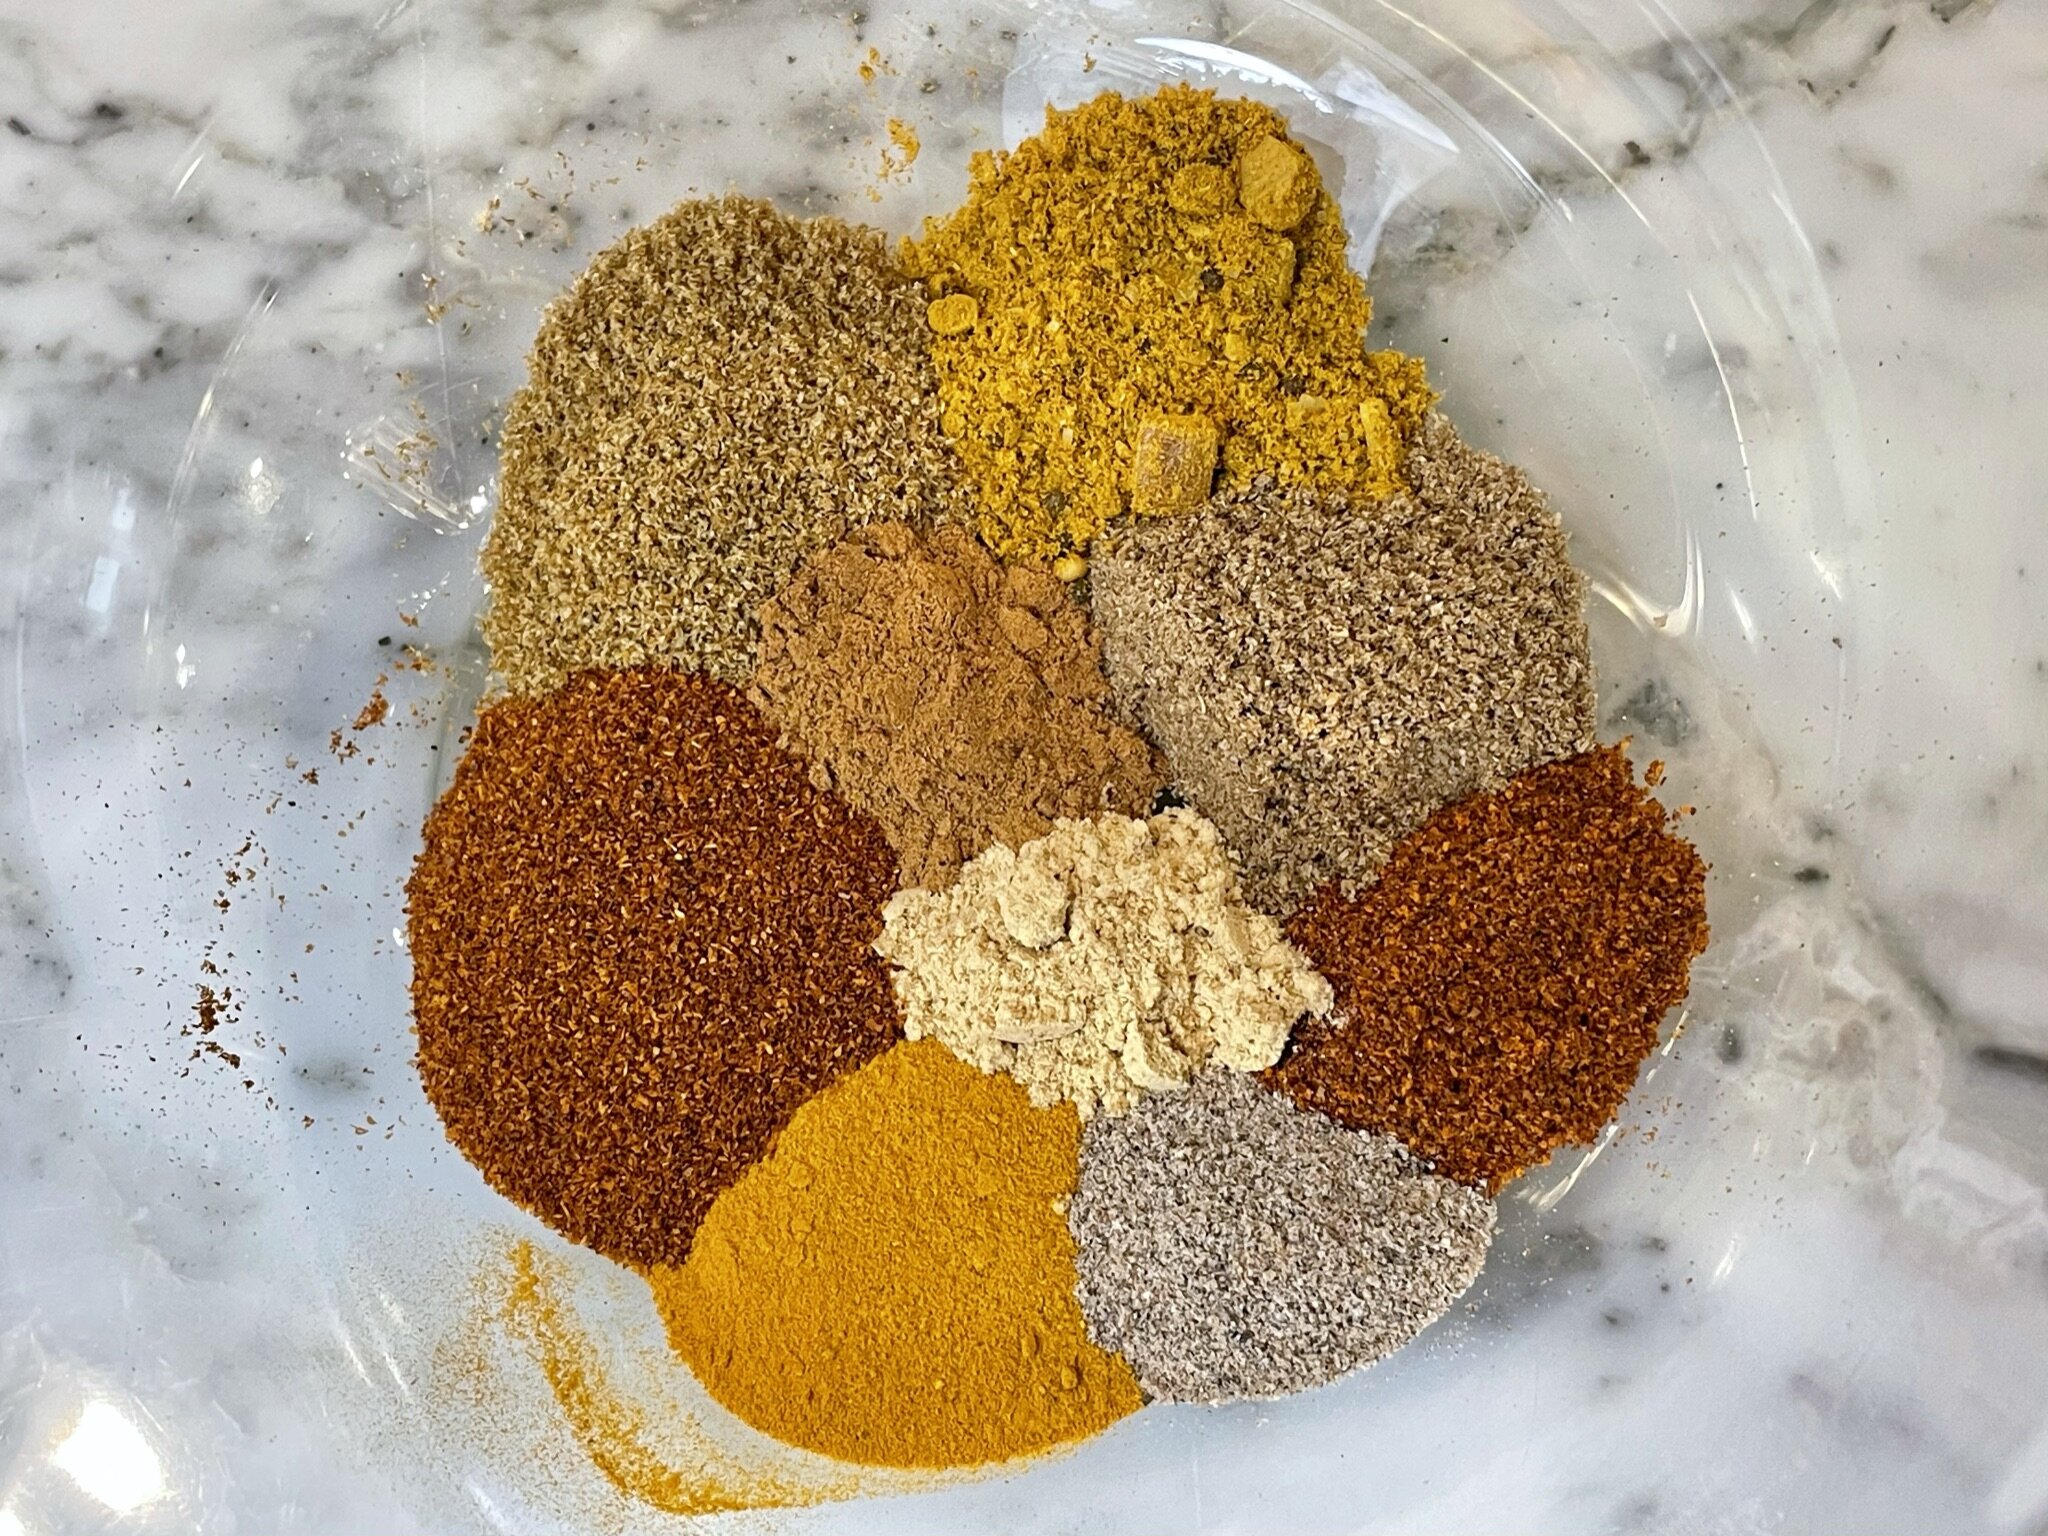 a) Add sauce spices to bowl.